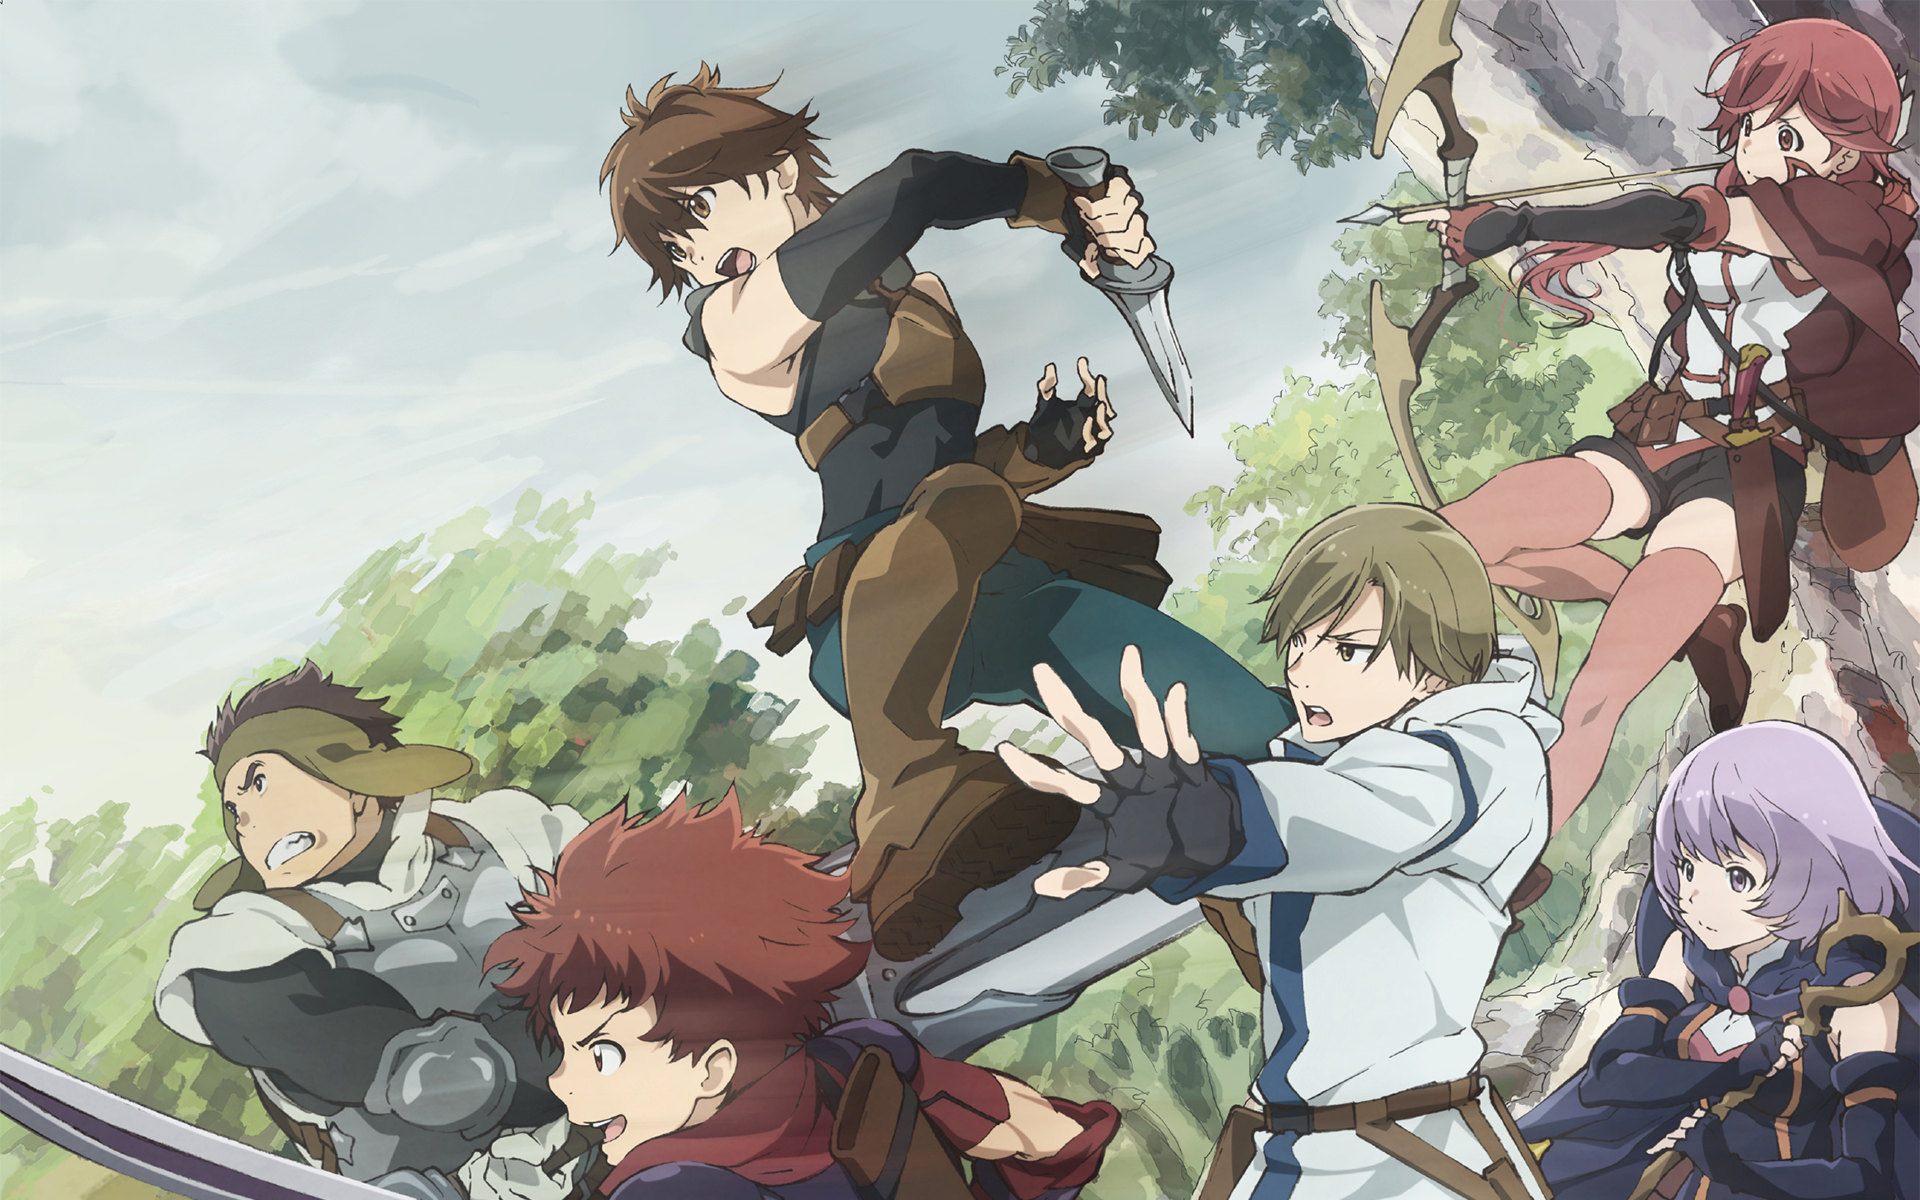 The 25 Best Medieval Anime Anime Impulse A boy born of nobility was sent to a castle as a. the 25 best medieval anime anime